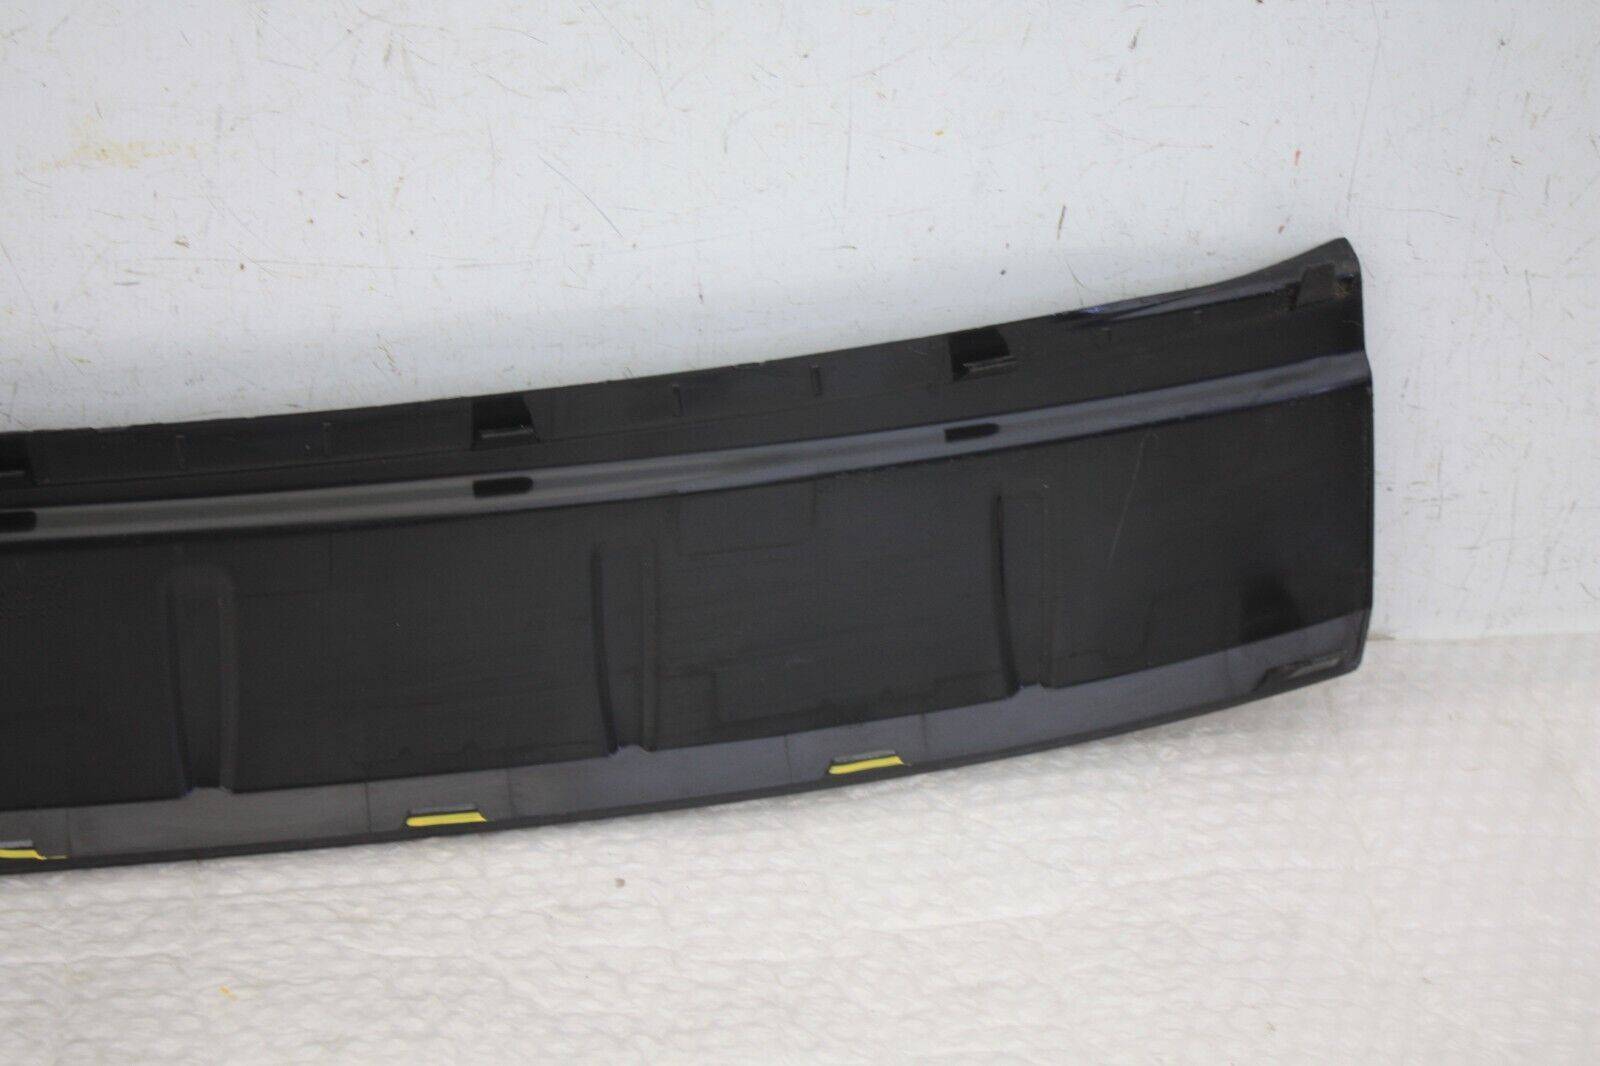 Volvo-XC60-Rear-Bumper-Protection-Cover-30764525-Genuine-FIXING-DAMAGED-176362657810-13